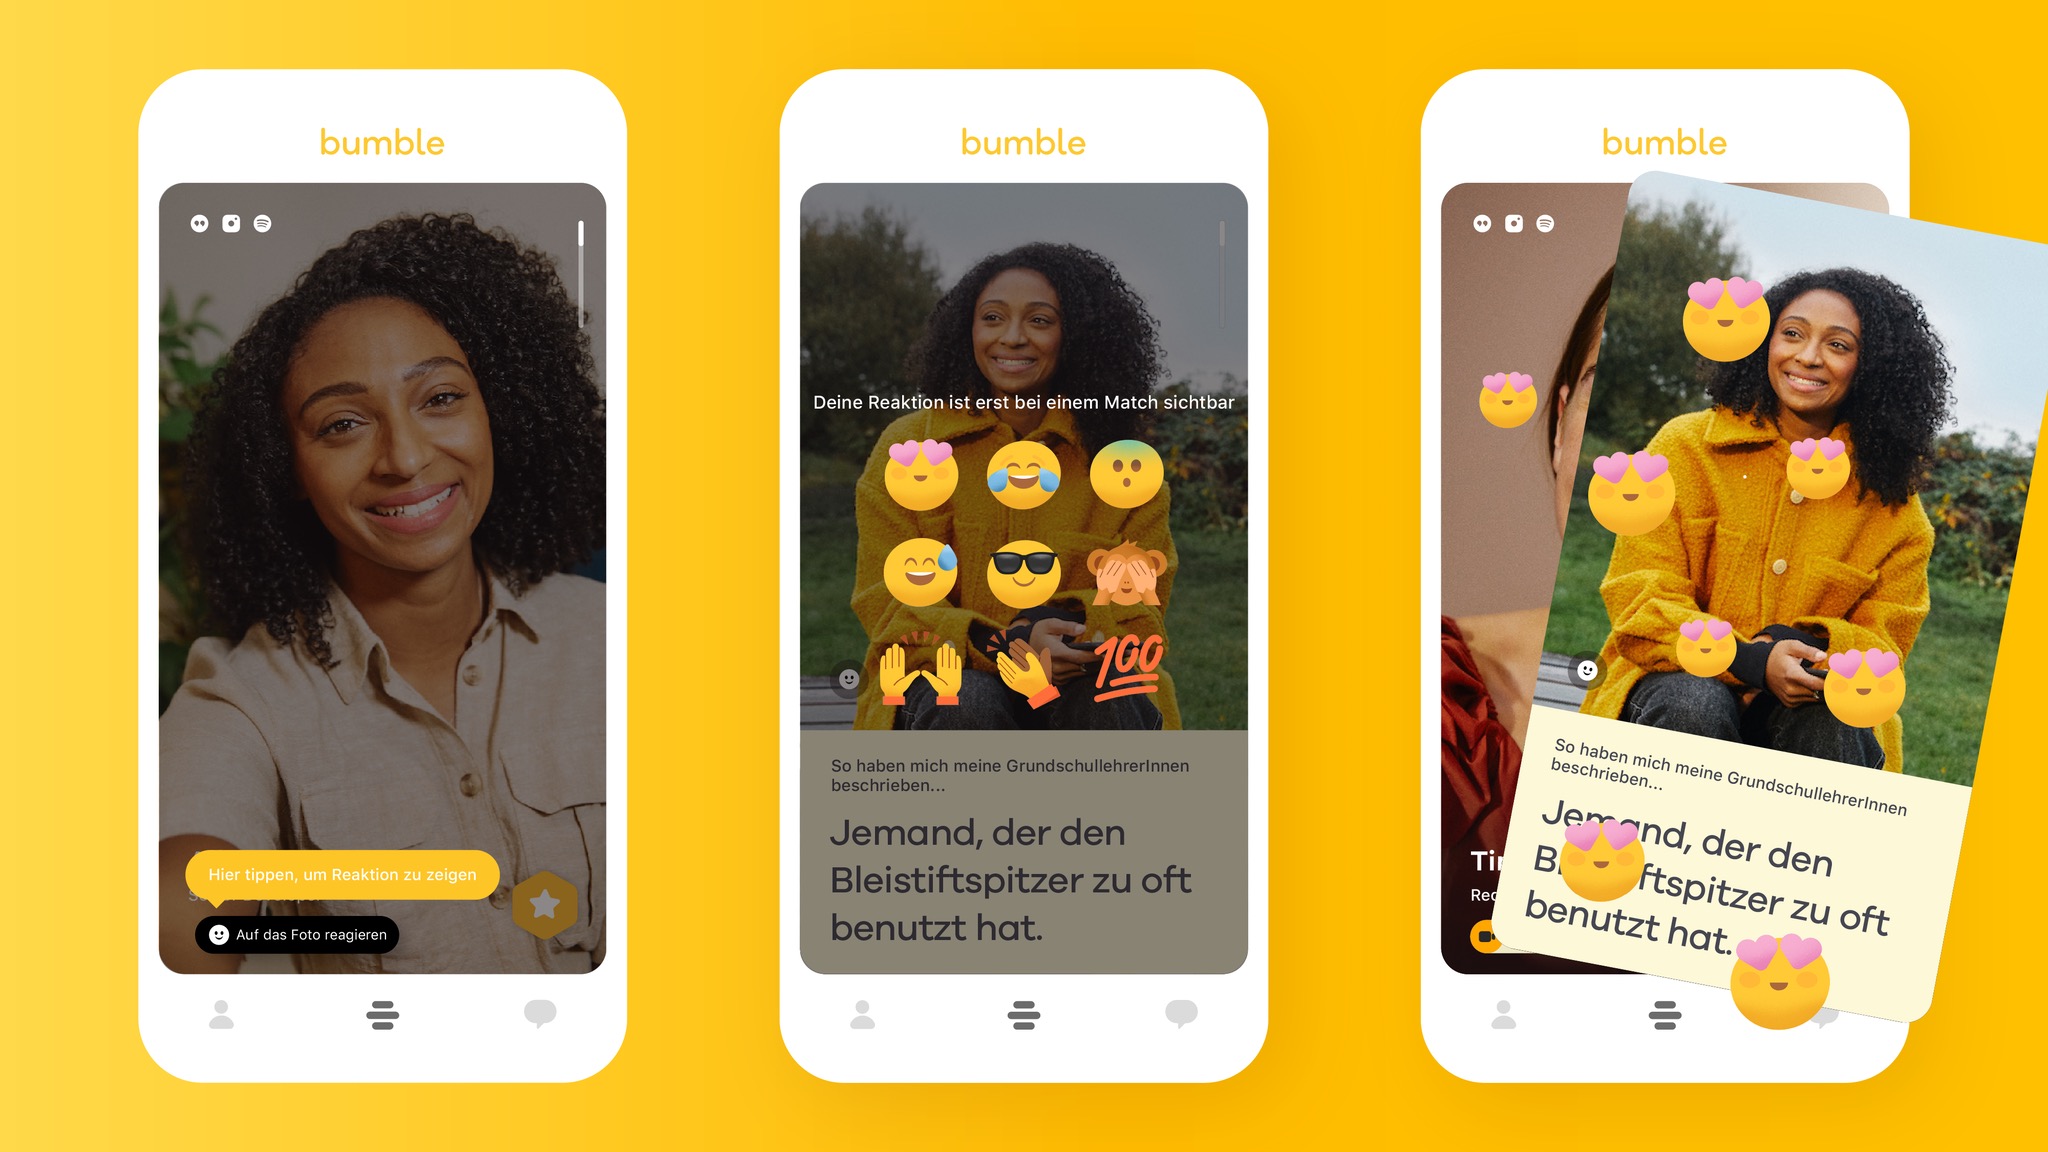 Bumble: This is where women take the first step – also with emojis